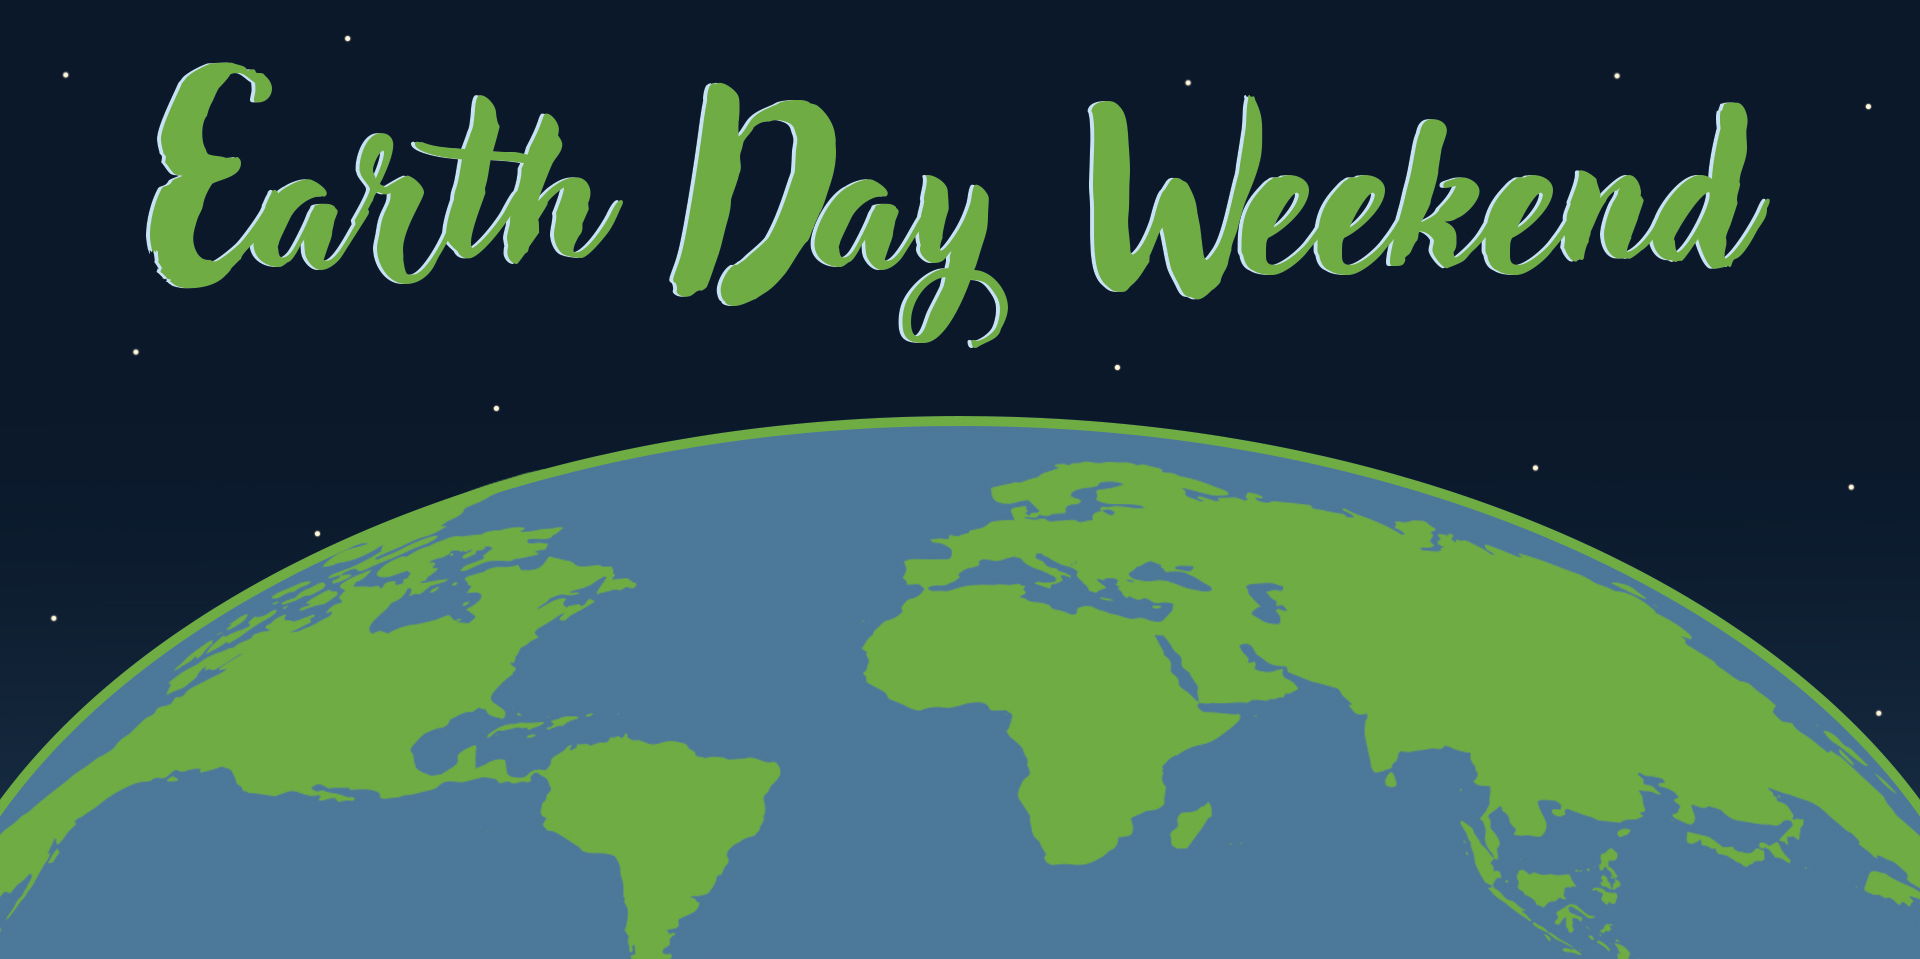 Earth Day Weekend promotional image